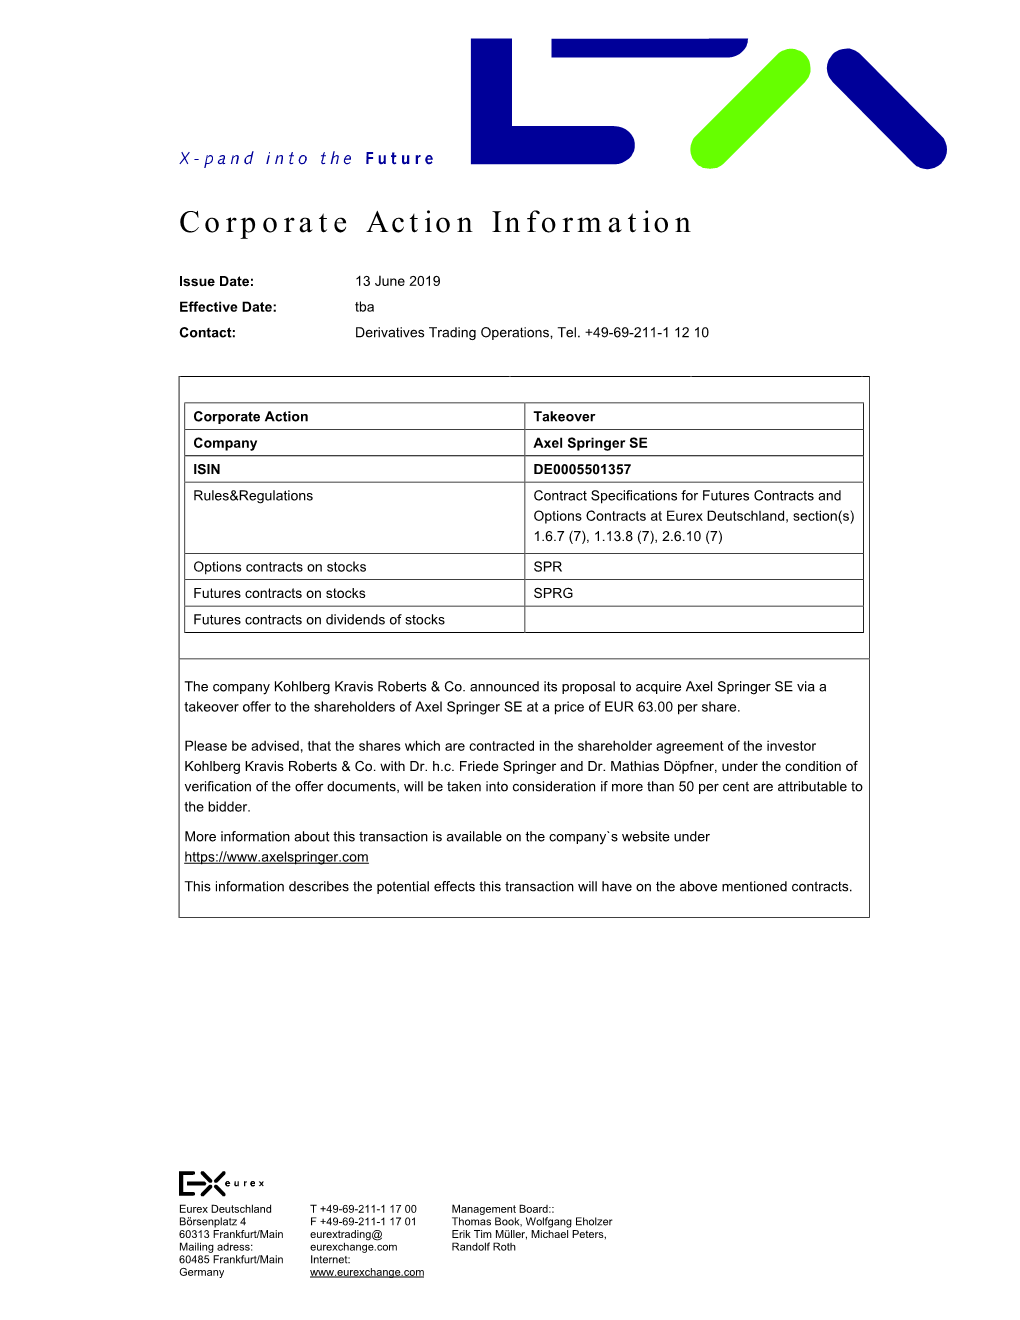 Corporate Action Information